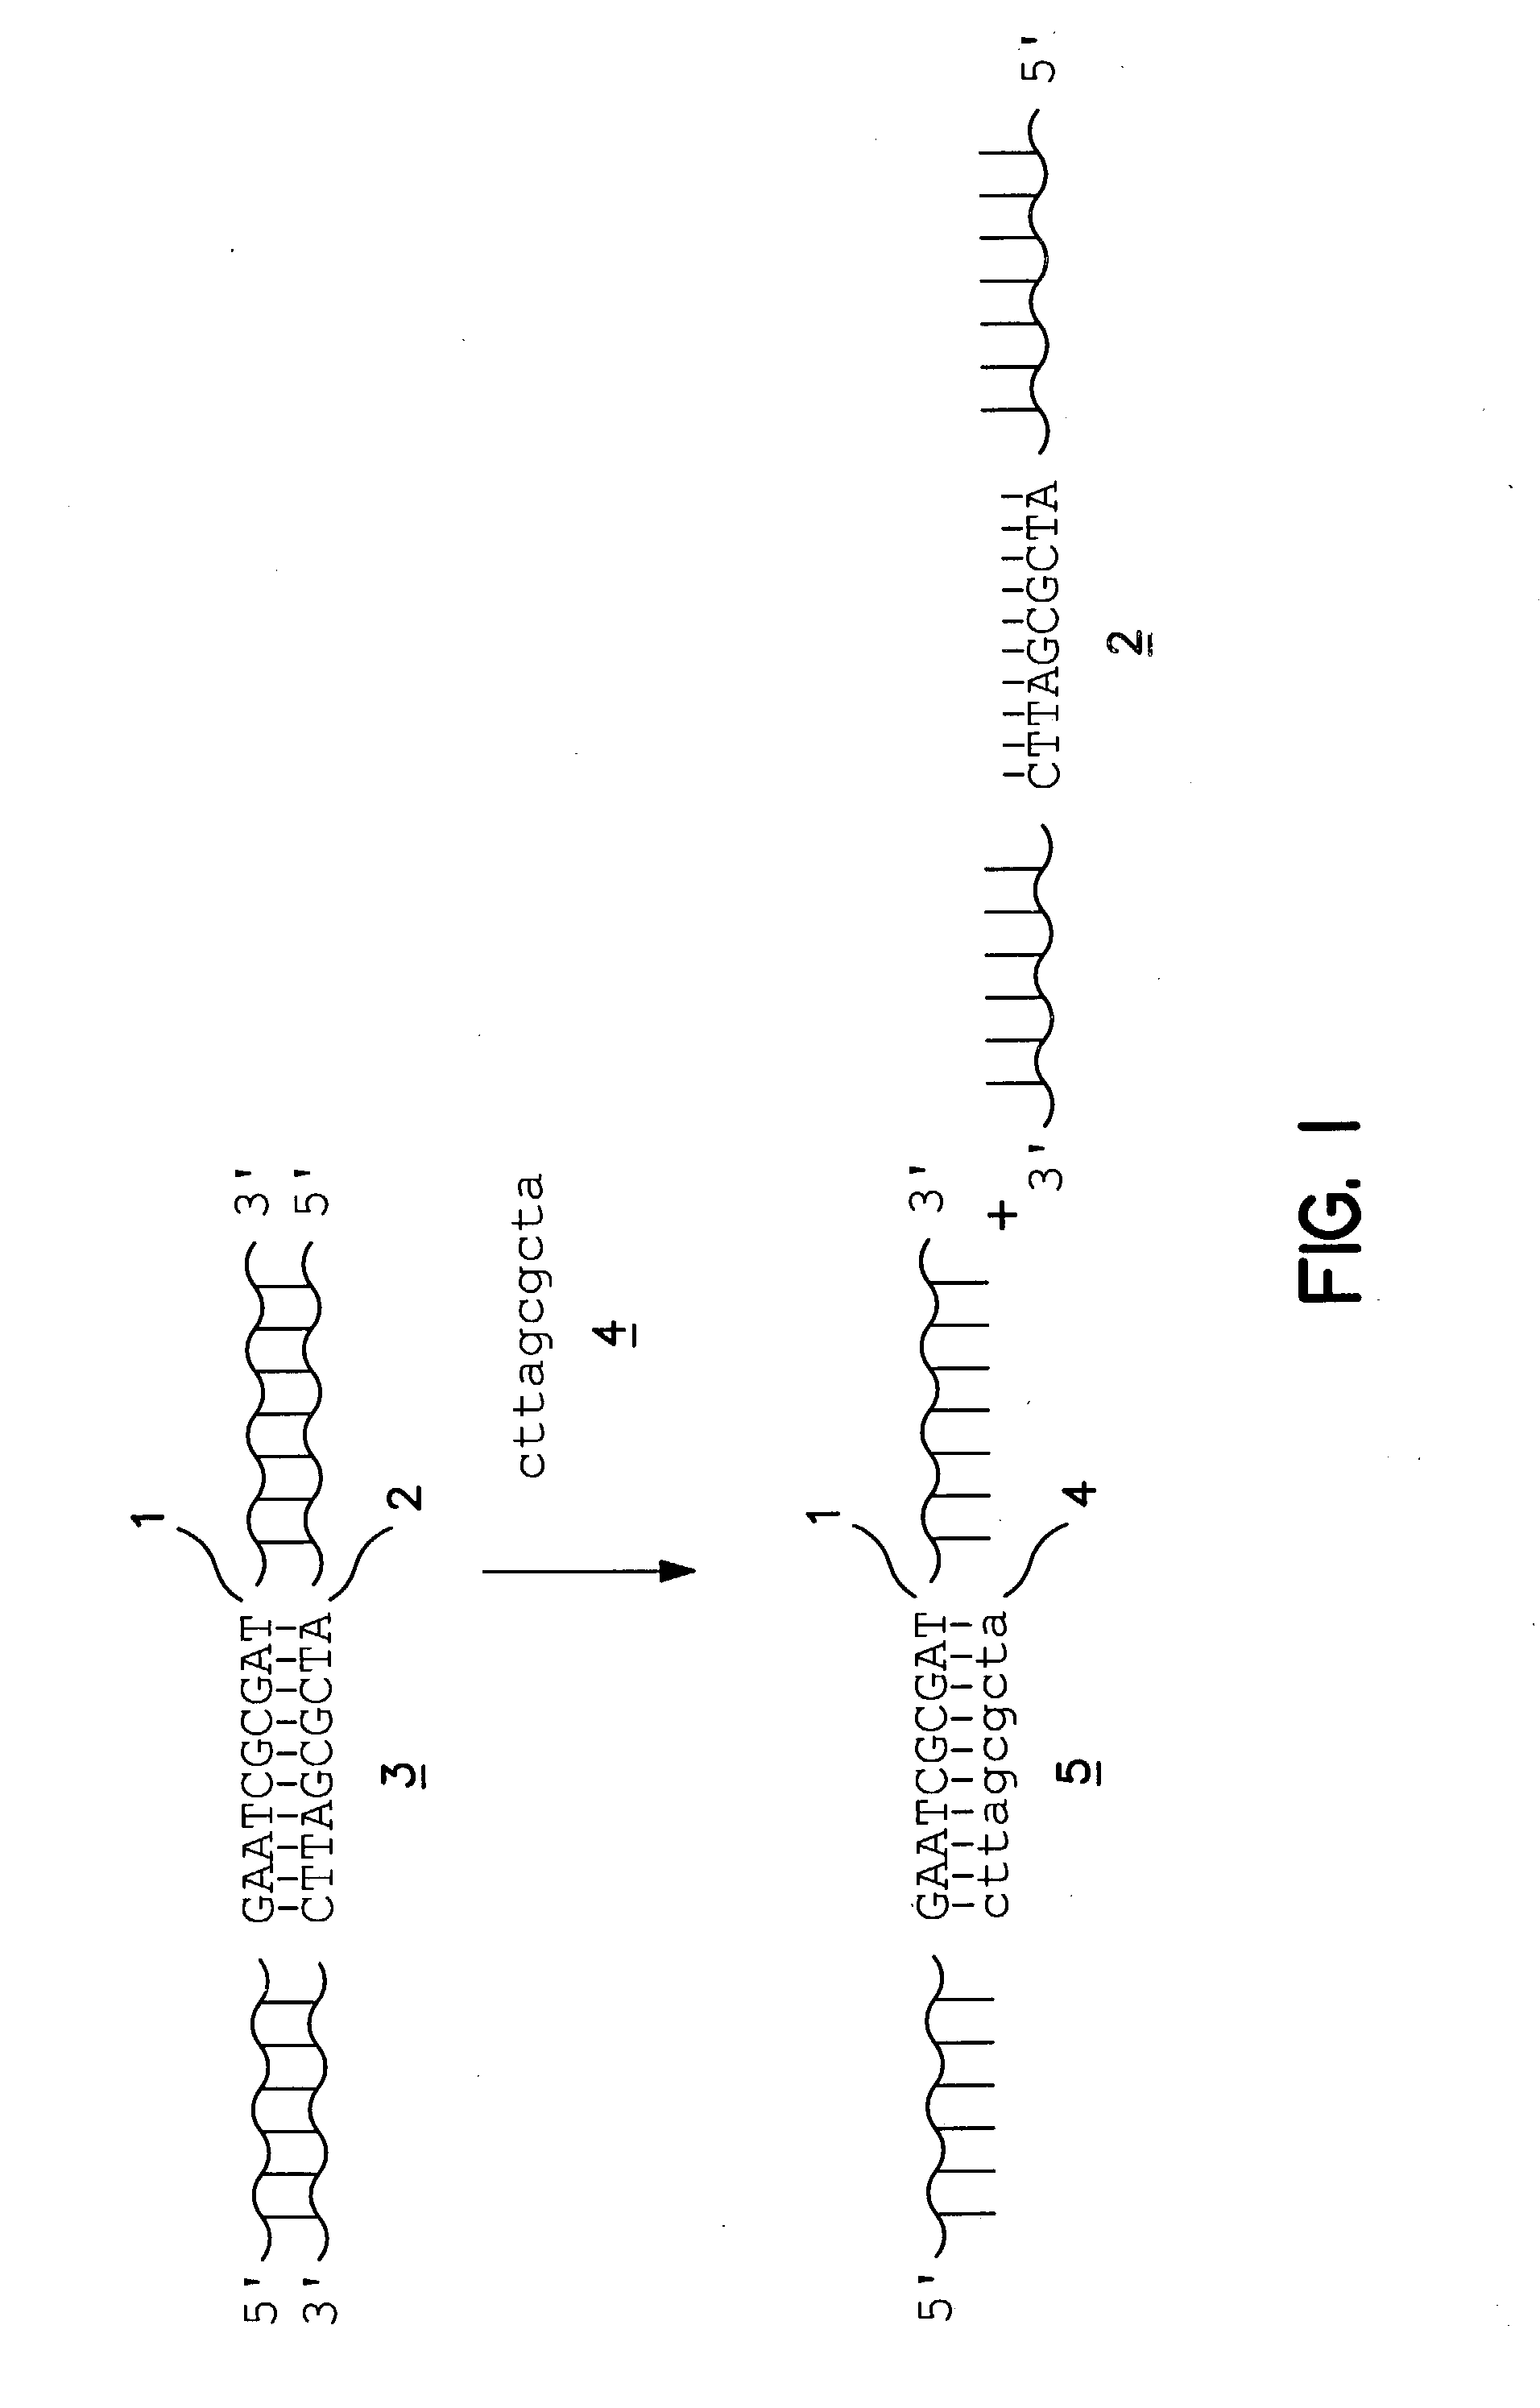 Methods for isolating one strand of a double-stranded nucleic acid